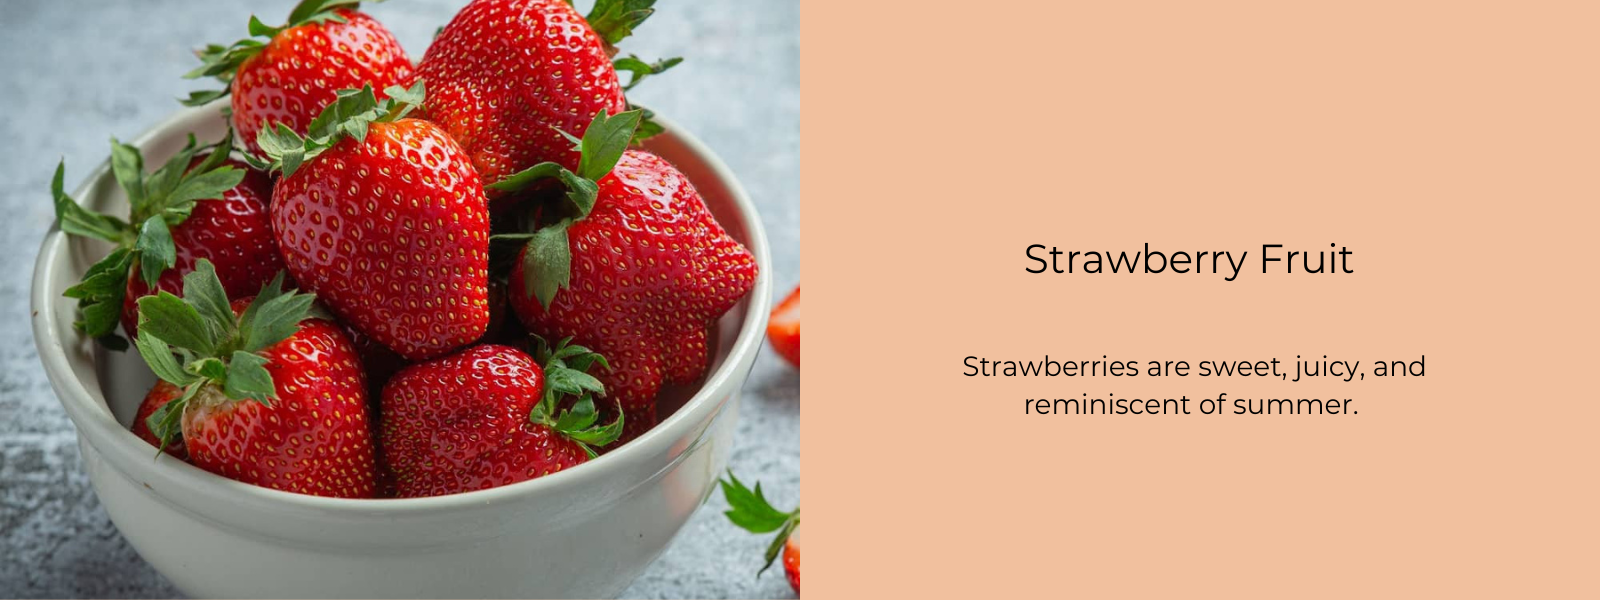 Strawberry Fruit - Health Benefits, Uses and Important Facts